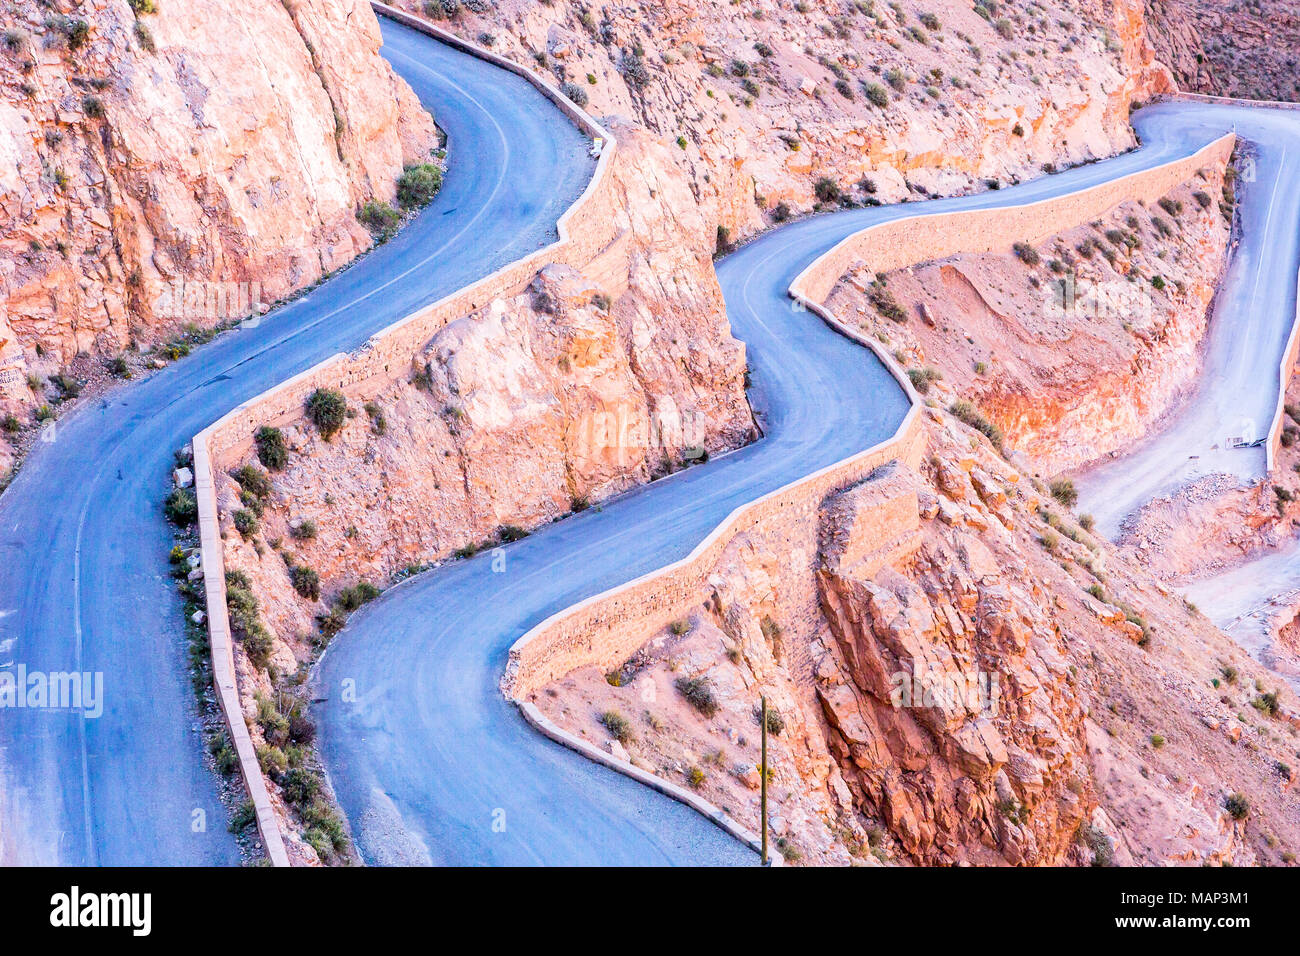 Dades Gorge is a beautiful road between the Atlas Mountains in Morocco Stock Photo